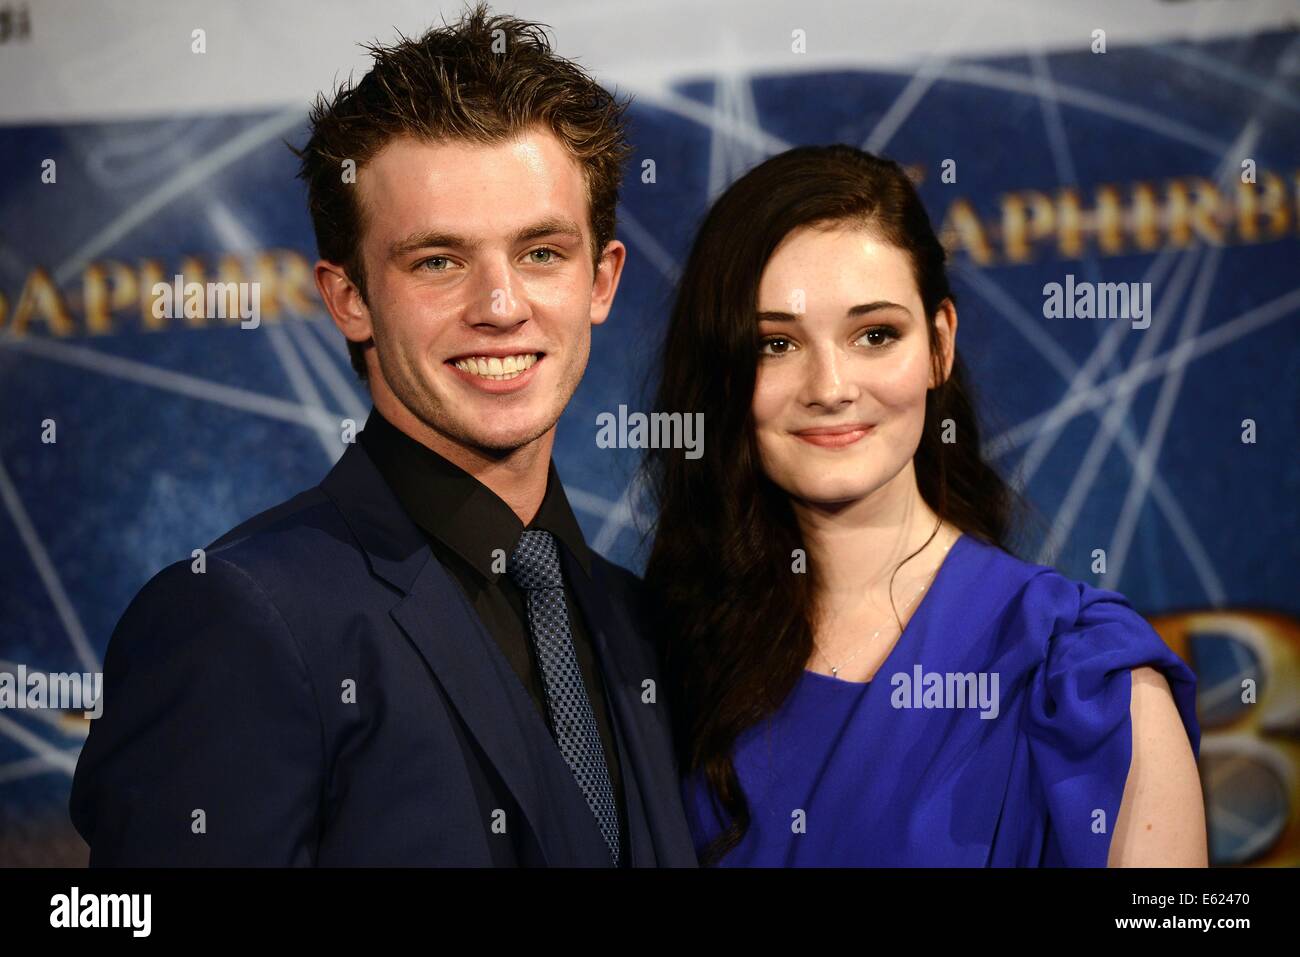 Cologne, Germany. 11th Aug, 2014. Actors Jannis Niewoehner and Maria Ehrich pose before the premiere of the film 'Sapphire Blue' in Cologne, Germany, 11 August 2014. The film will come to German cinemas on 14 August 2014. Photo: Henning Kaiser/dpa/Alamy Live News Stock Photo